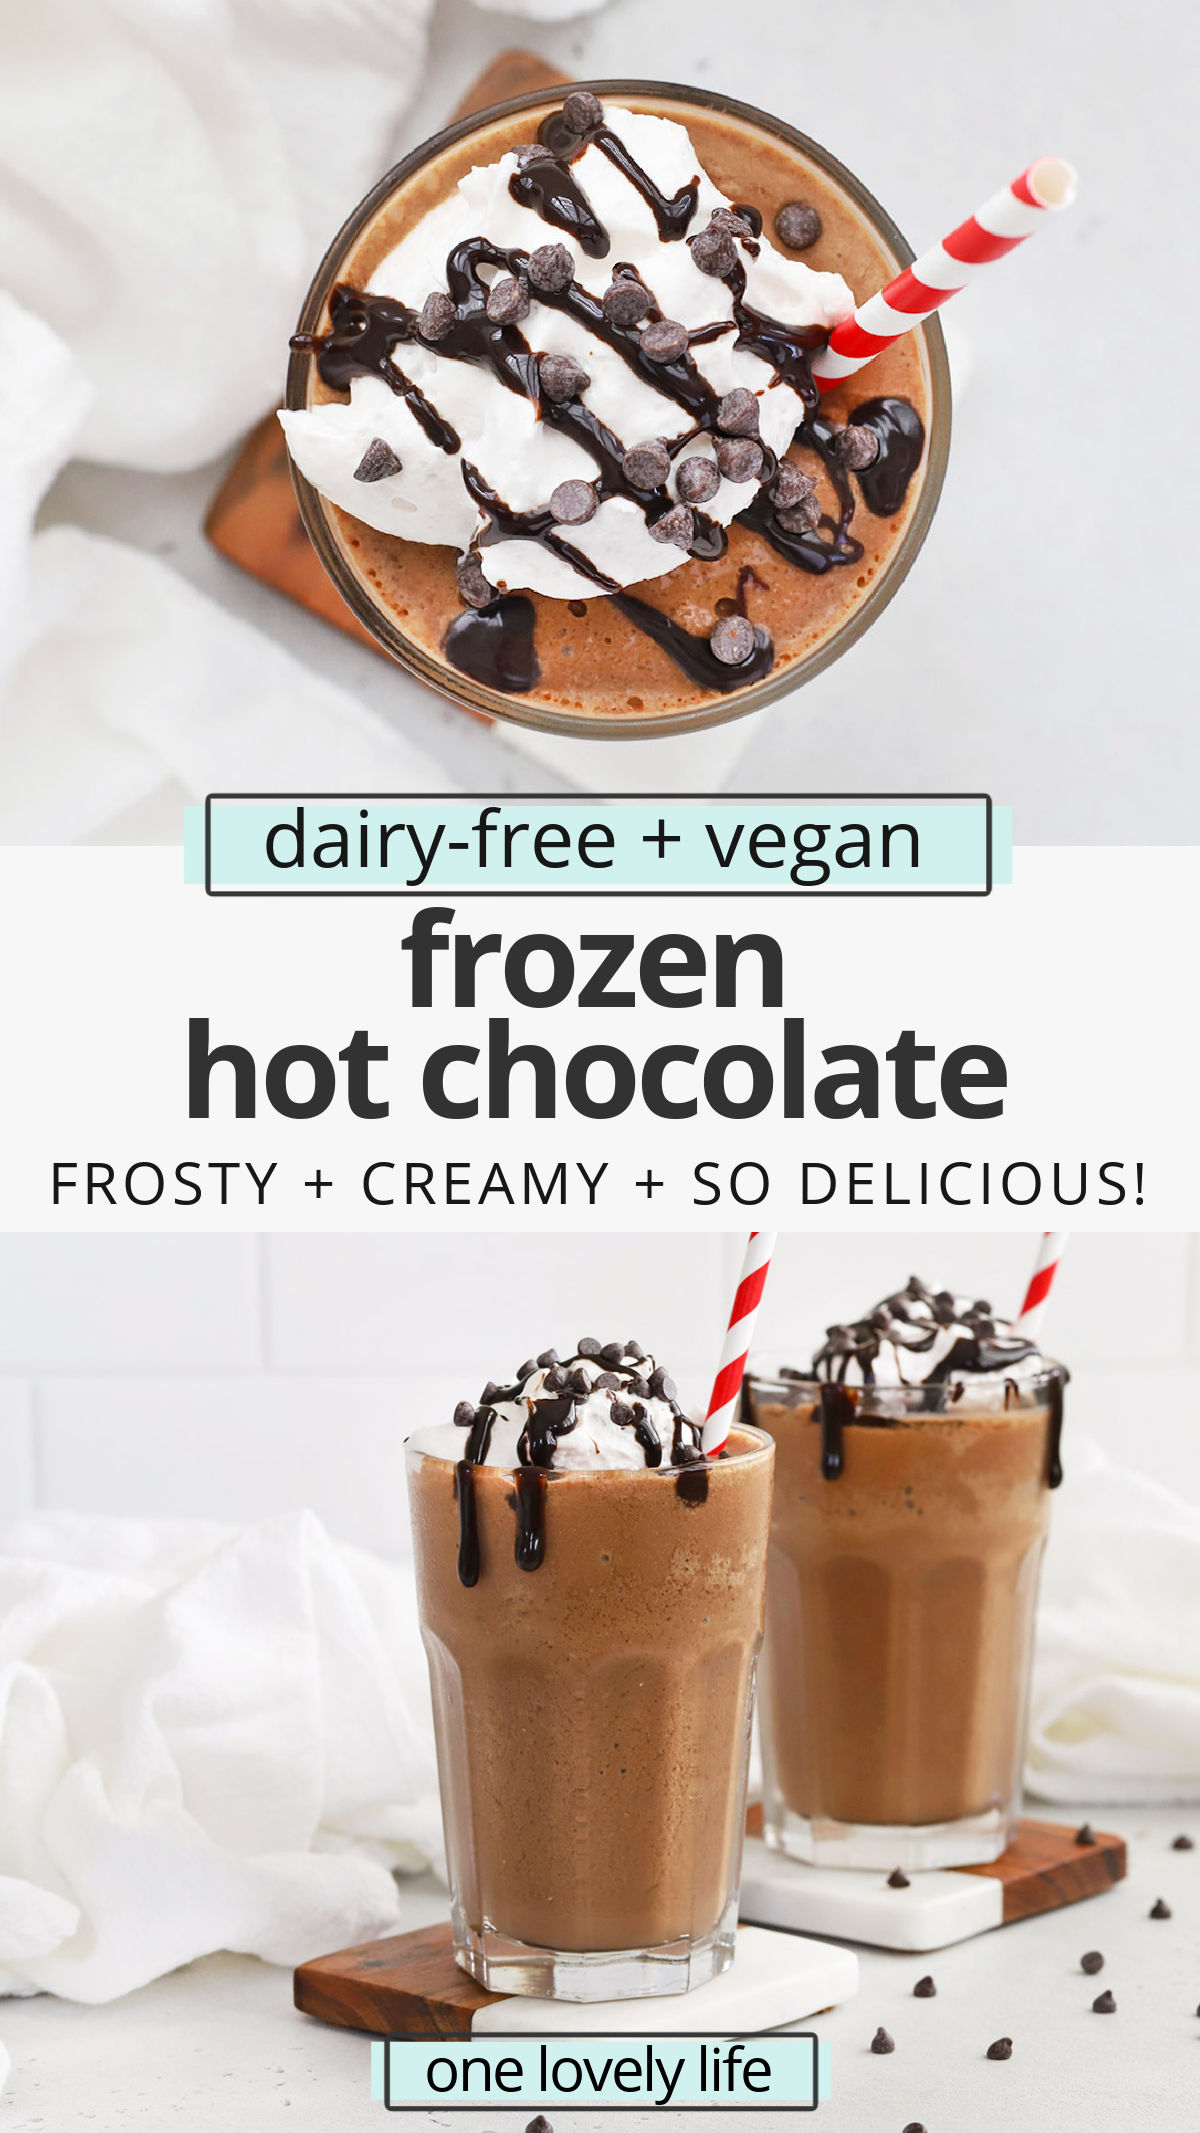 Vegan Frozen Hot Chocolate - This dairy-free frozen hot chocolate is frost, creamy, and so delicious with a swirl of whipped cream and some chocolate on top. You won't want to miss it! // Paleo Frozen Hot Chocolate // Healthy Frozen Hot Chocolate recipe #frozenhotchocolate #paleo #vegan #dairyfree #glutenfree